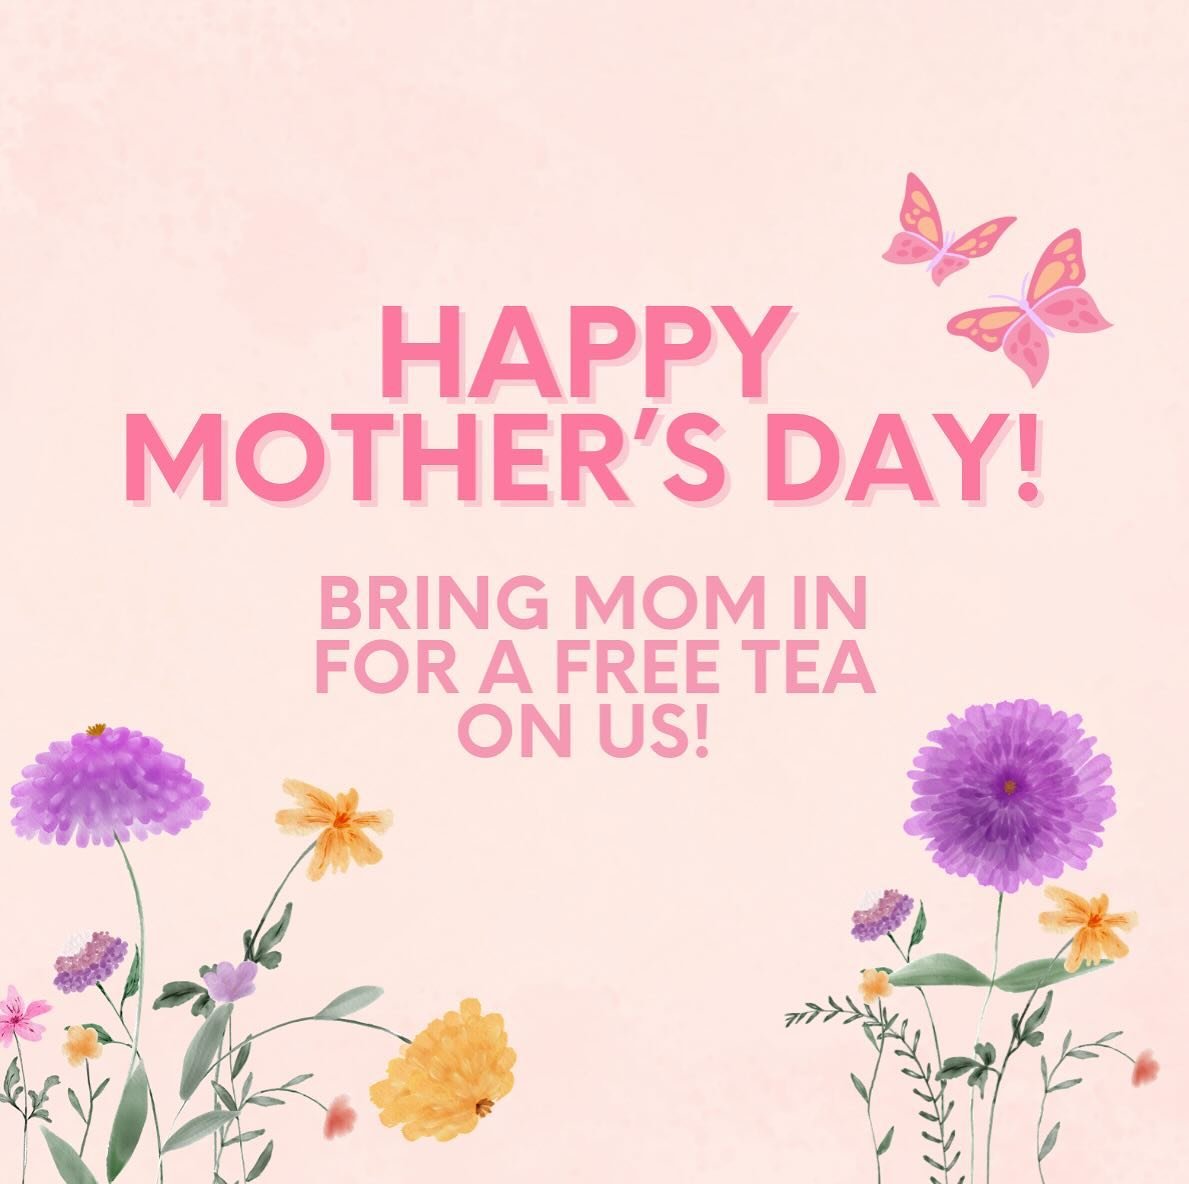 🌸Celebrate Mother&rsquo;s Day with us!🌸

Bring mom in for a FREE boba tea on us! 

-Family/child must be present 
-With a purchase of one additional drink
-Offer is valid only today 5/12